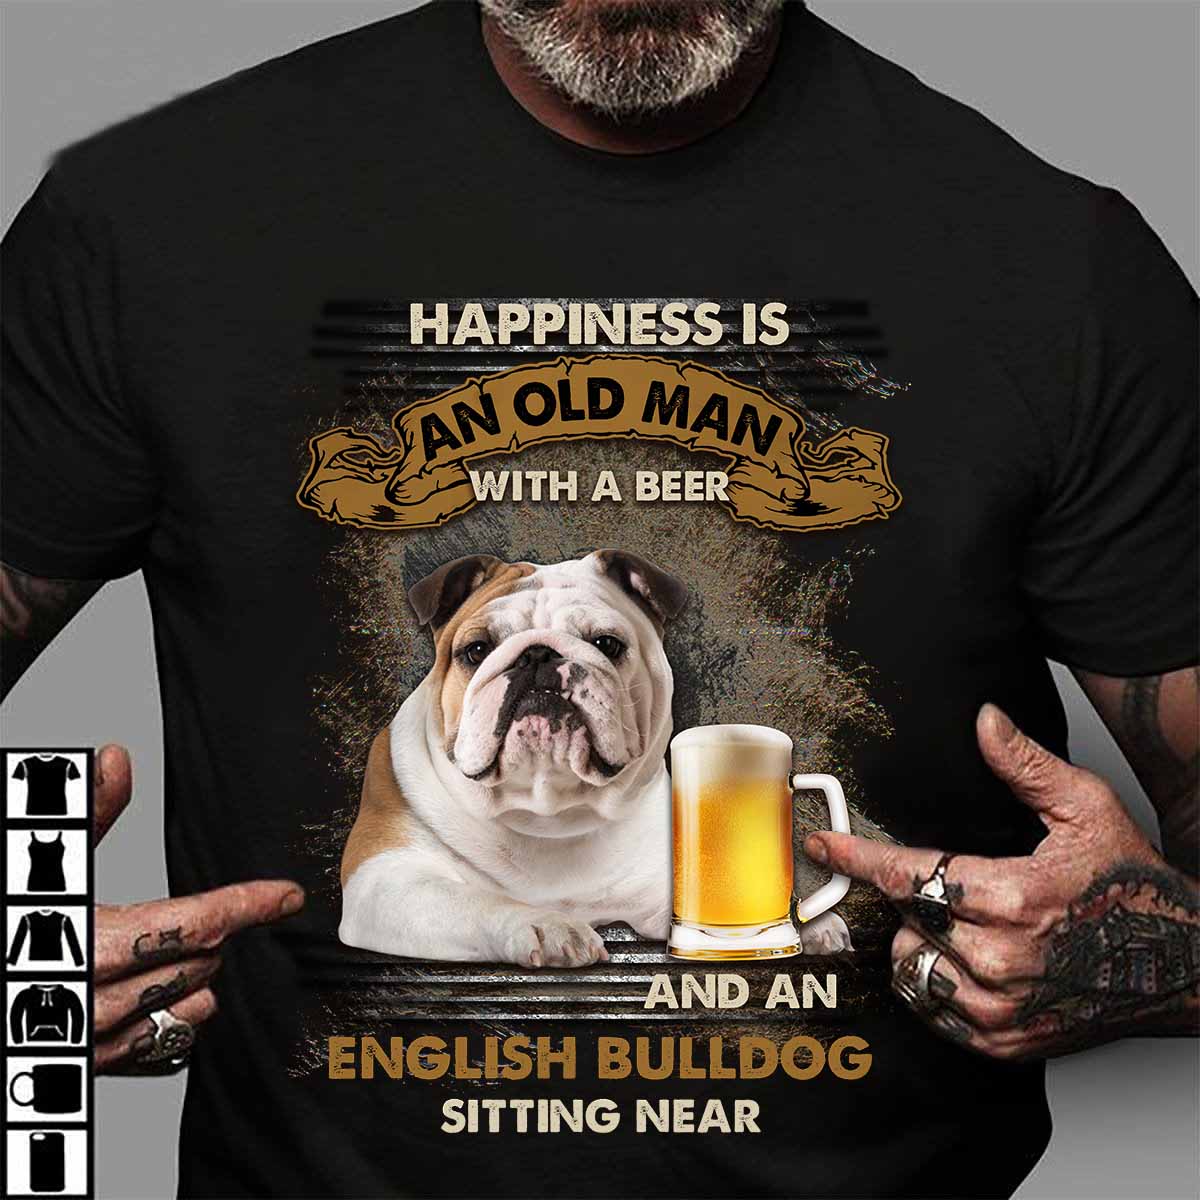 Happiness is an old man with a beer and an English bulldog sitting near - Bull dog and beer